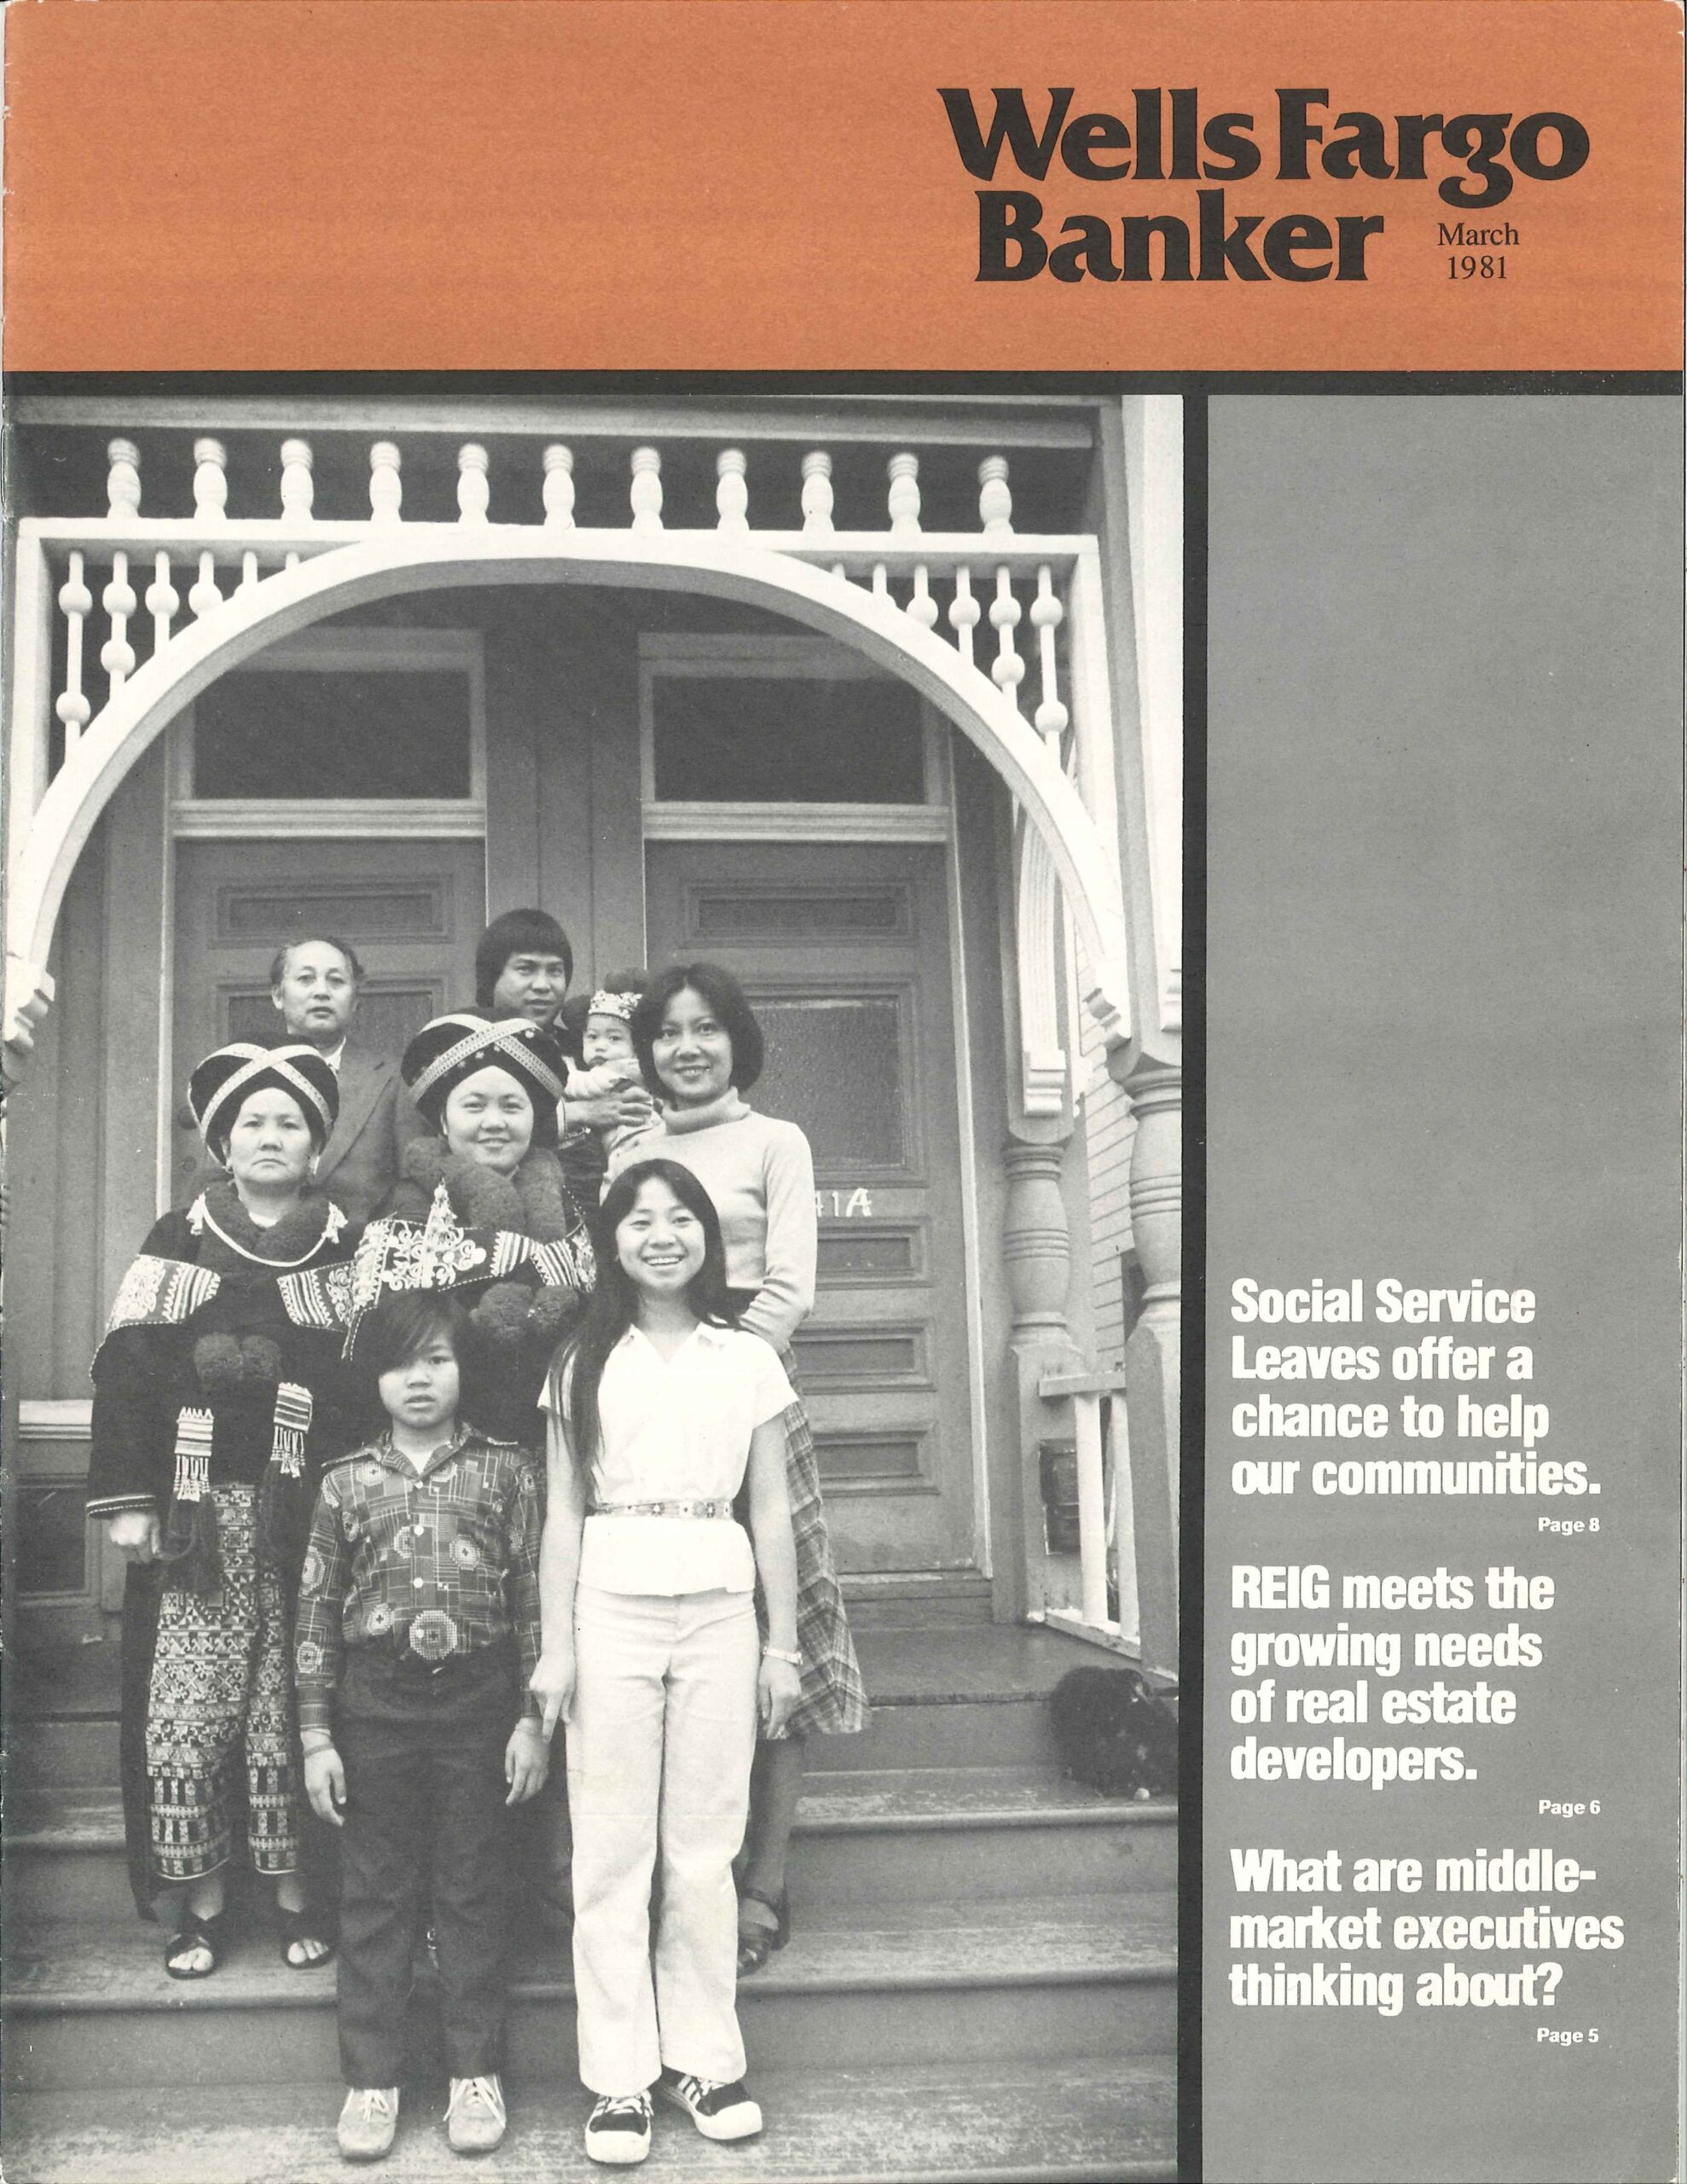 A brochure cover in black and white with large orange section at the top titled: Wells Fargo Banker. Below is a family standing on stairs before an arched doorway.